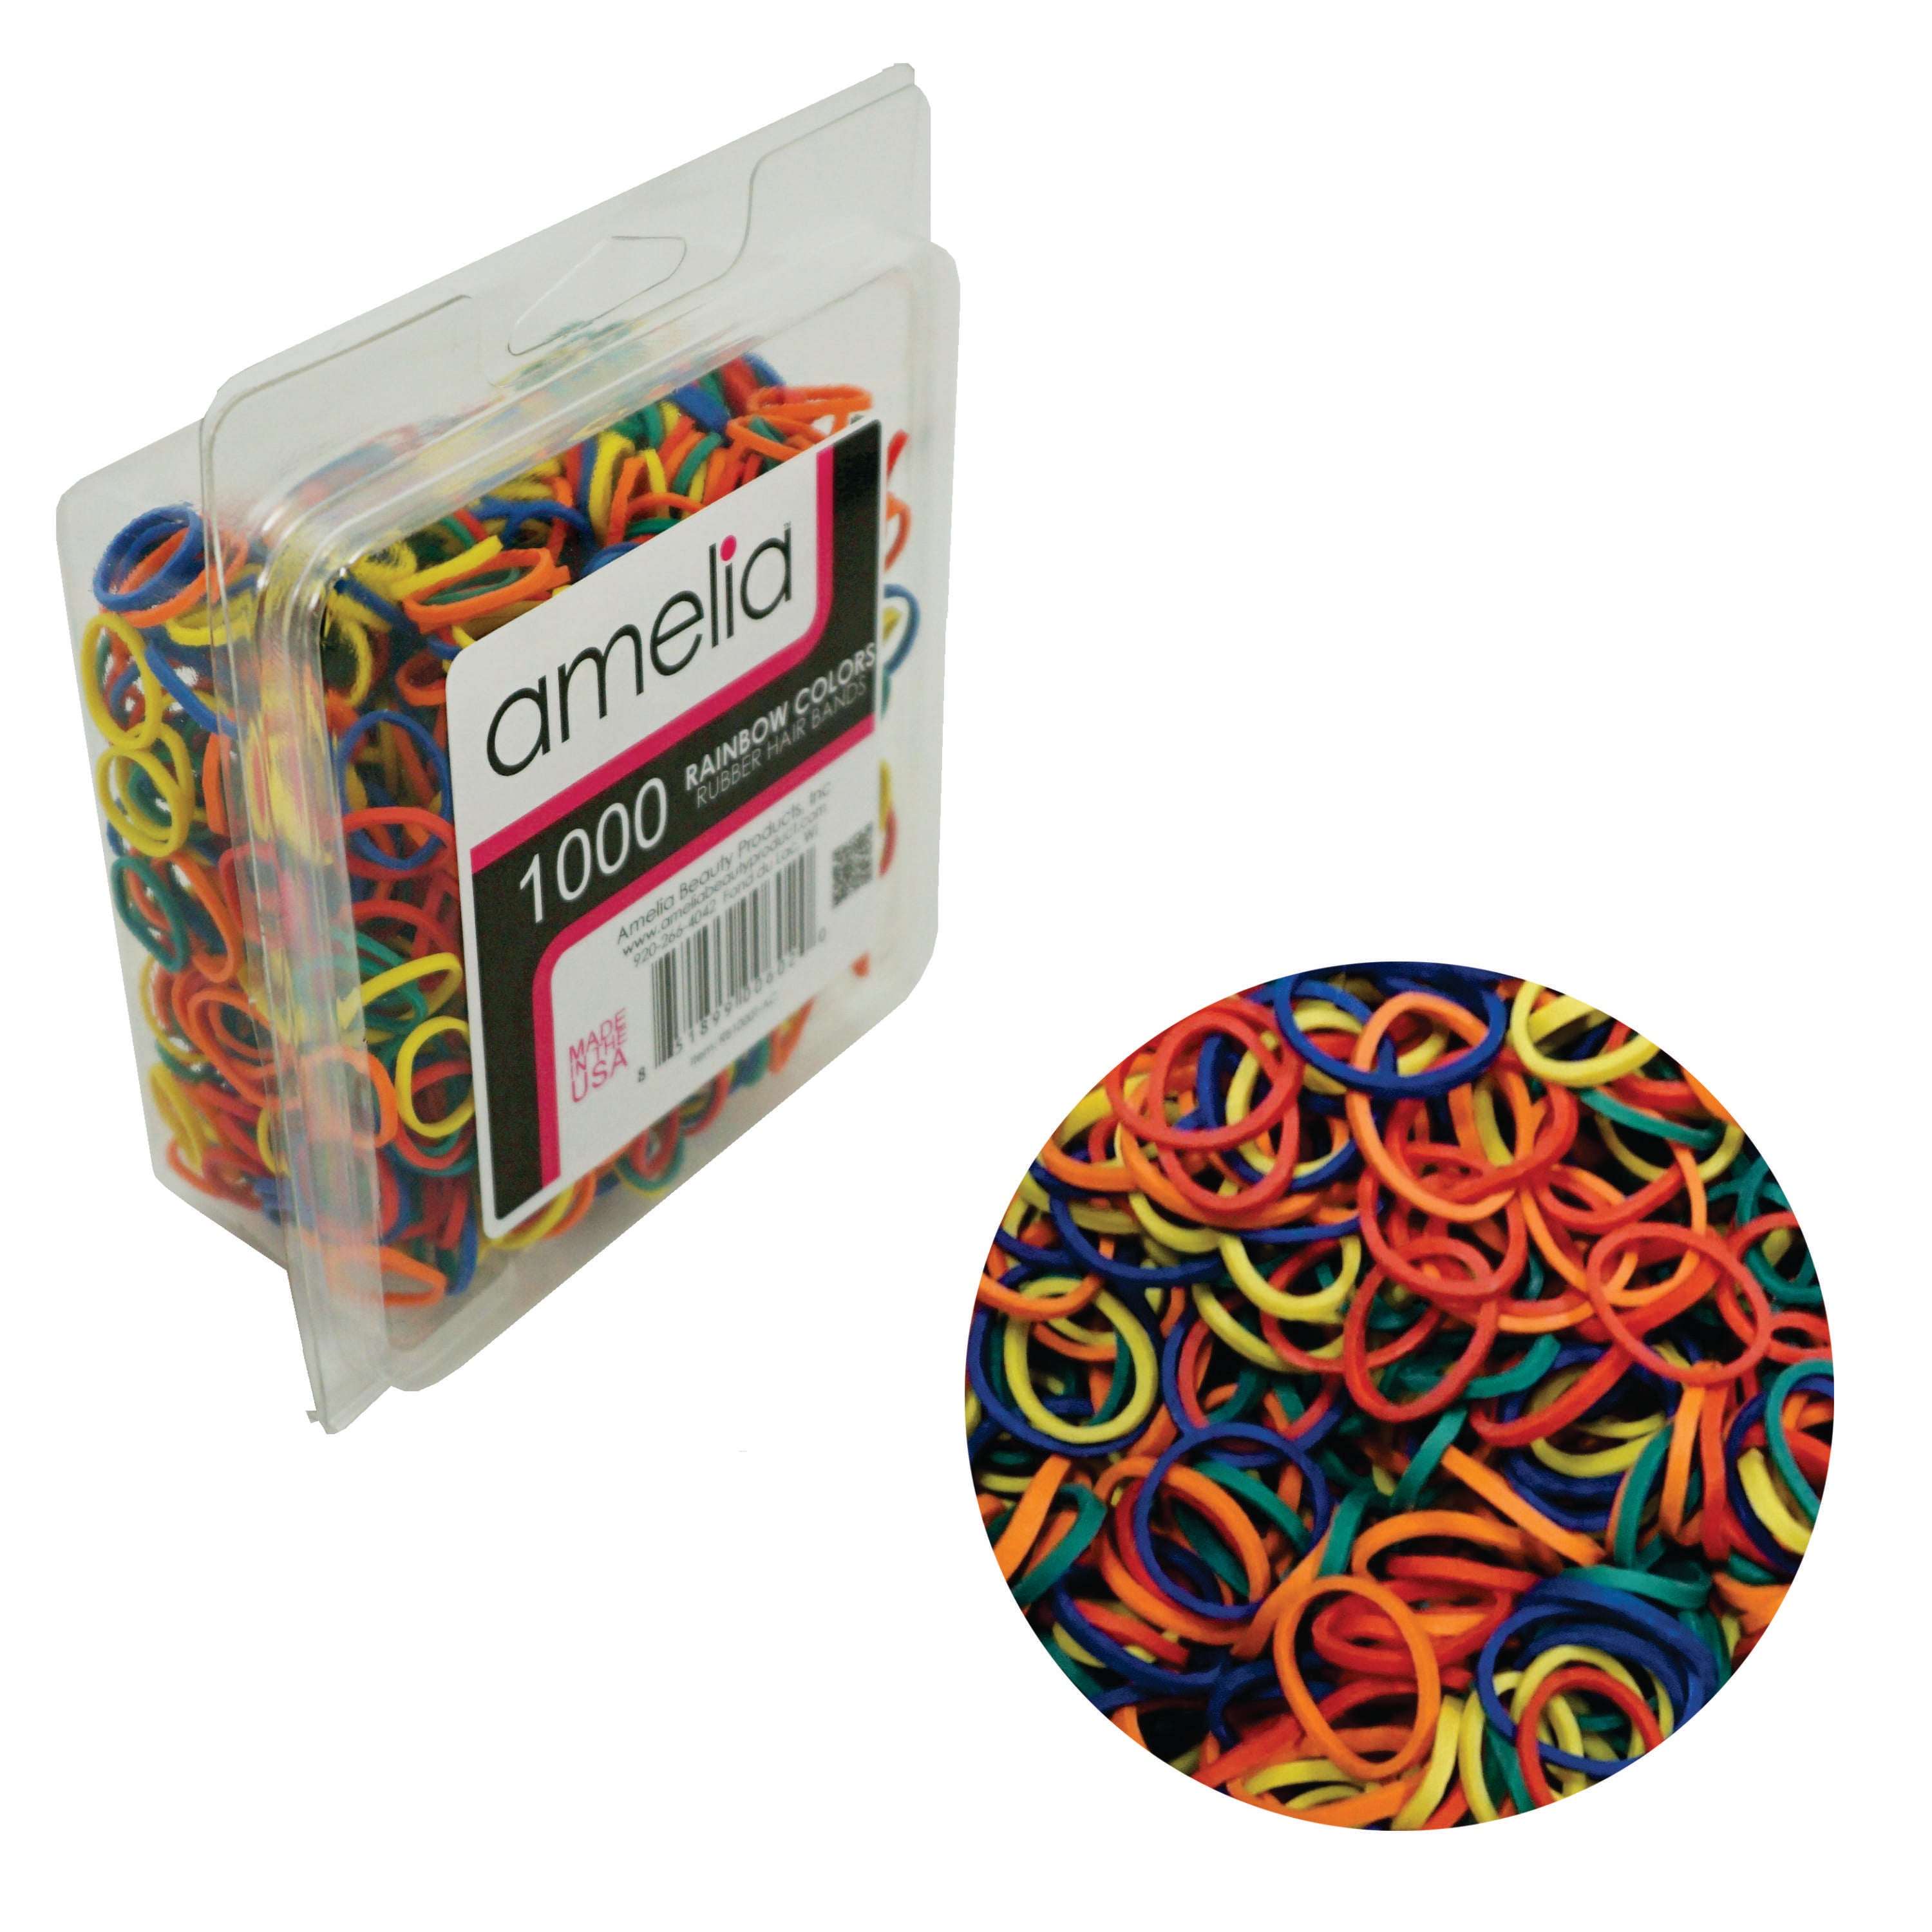 Amelia Beauty 1000, Rainbow Mix, Standard Size, Rubber Bands for